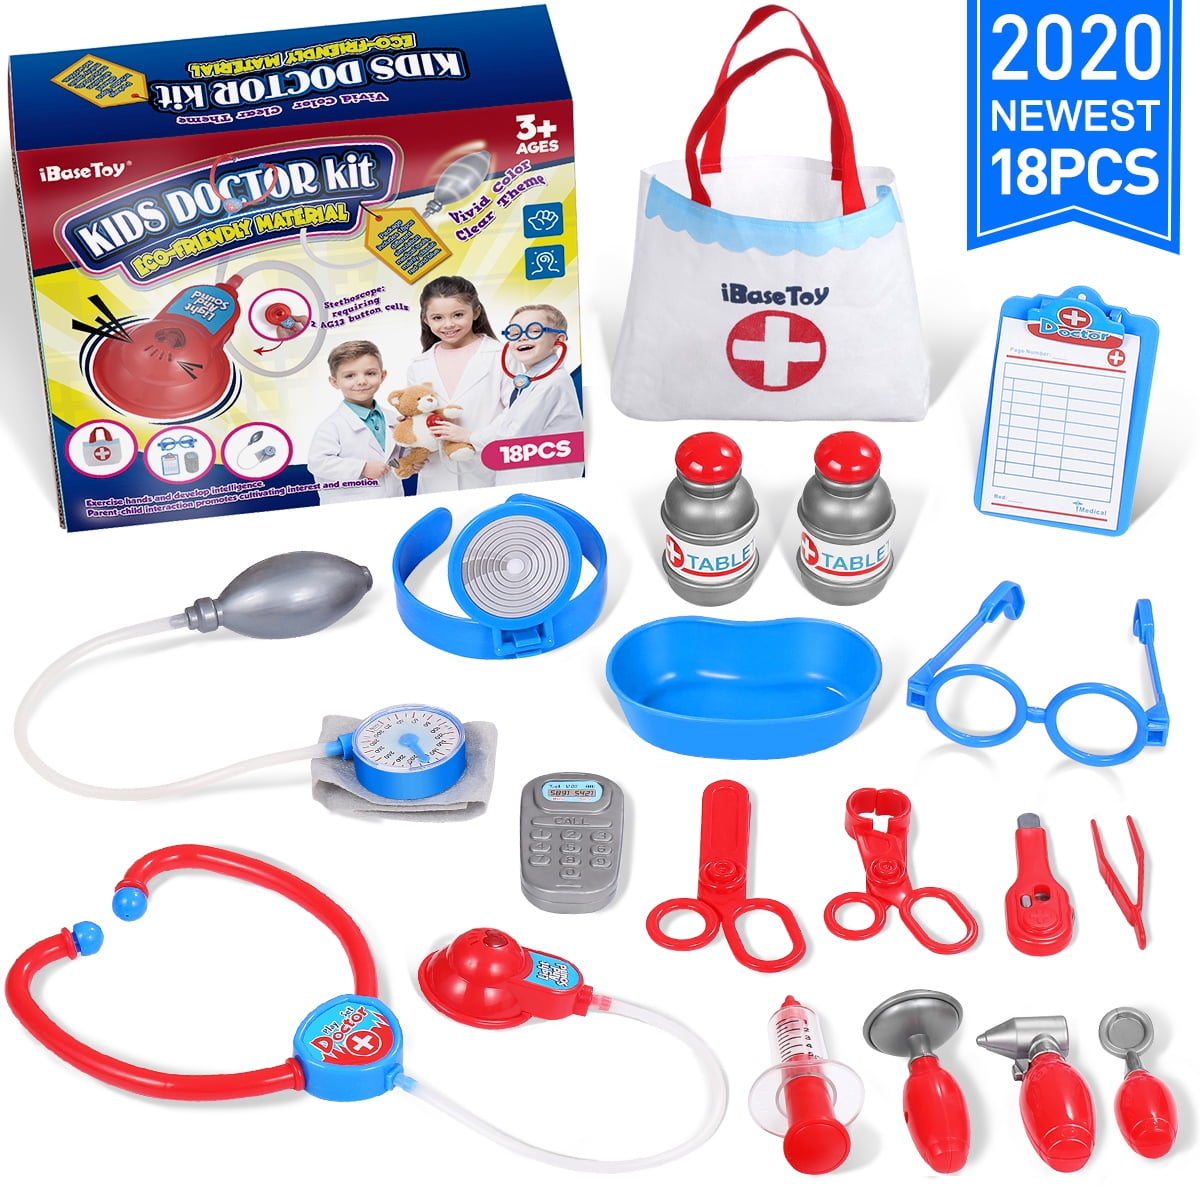 Details about   Childs Veterinarian Dr Doctor Nurse Bag Medical Stethoscope Pretend Play YW 